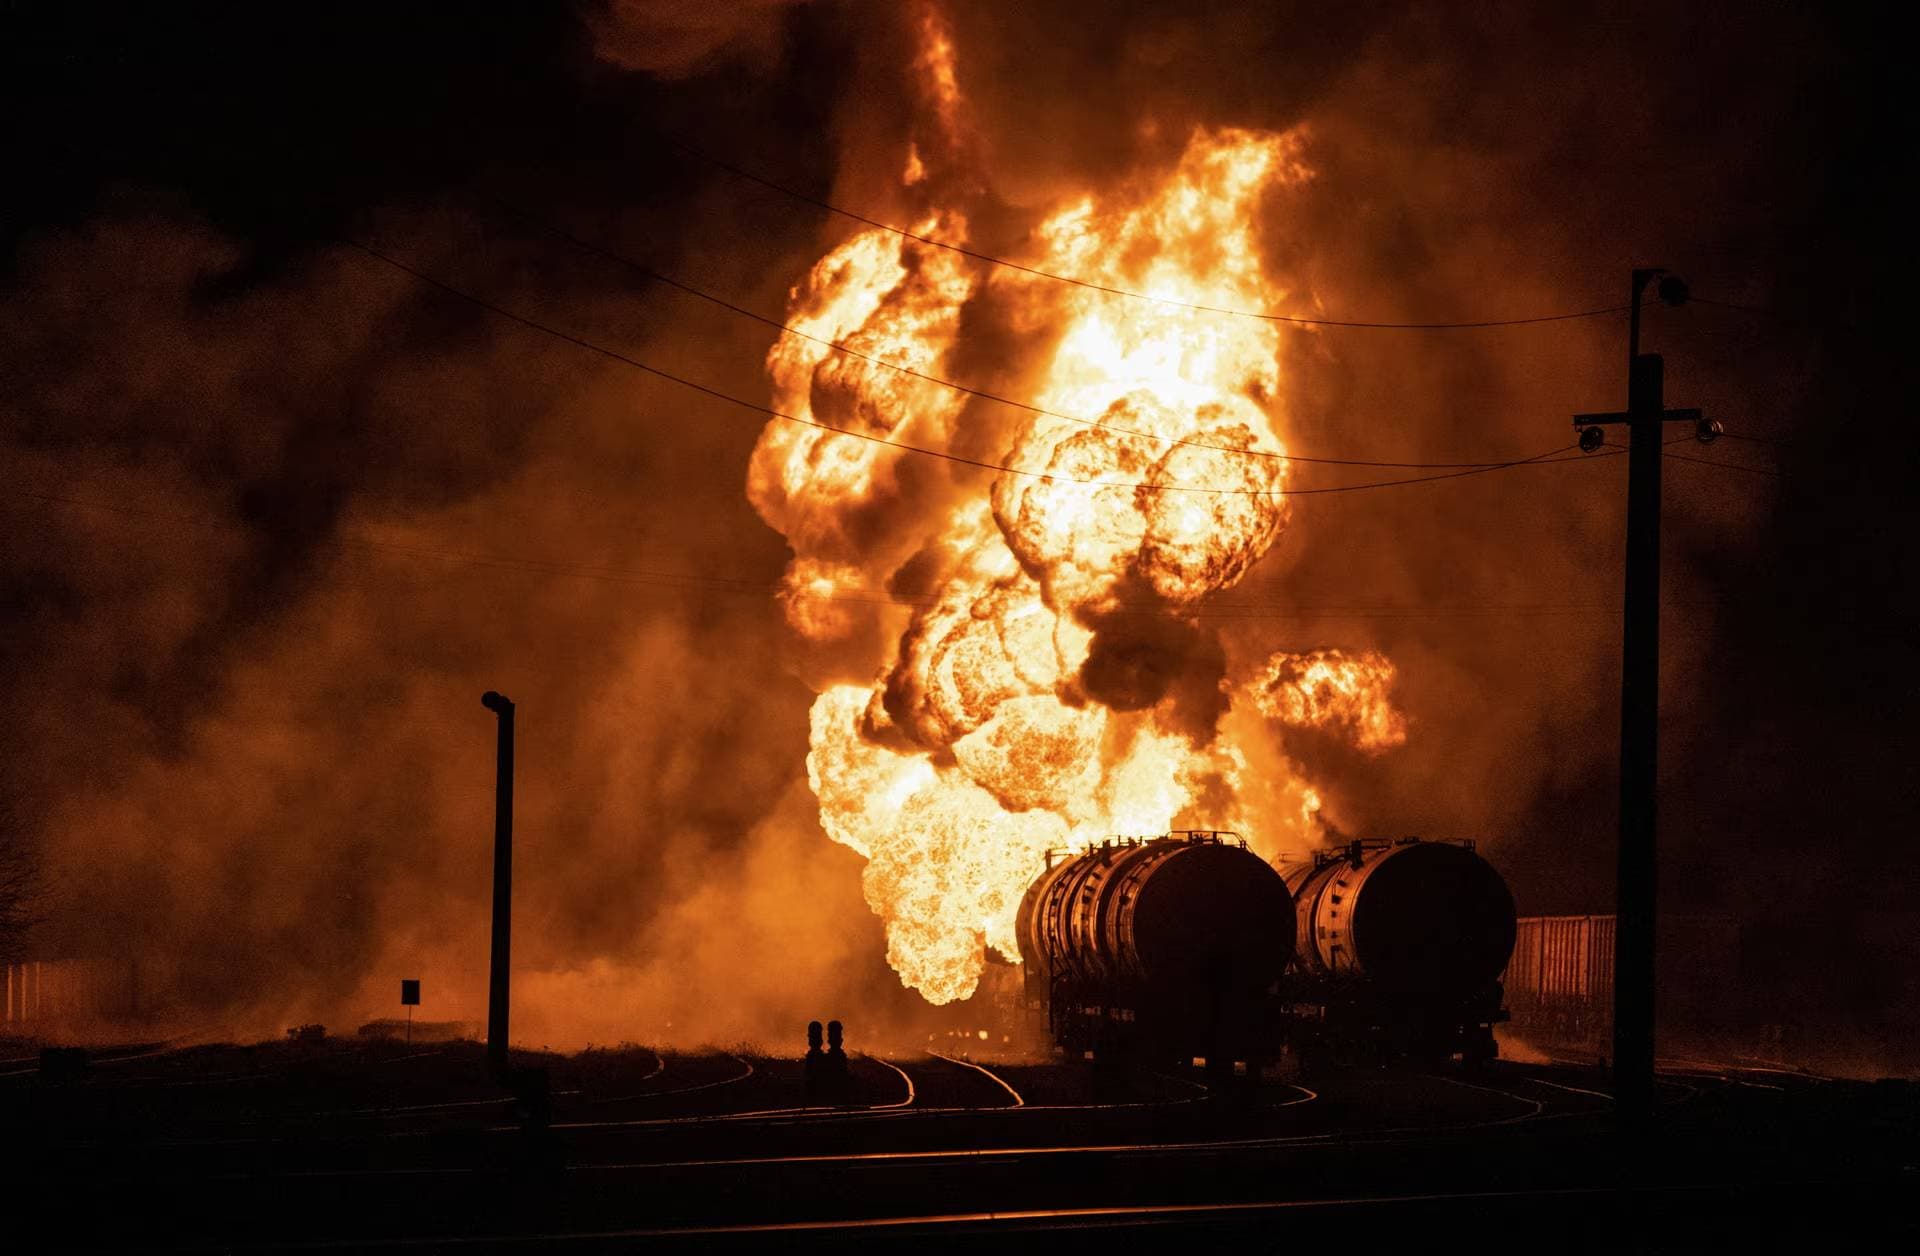 Tank cars set ablaze following recent shelling at a railway junction in Donetsk